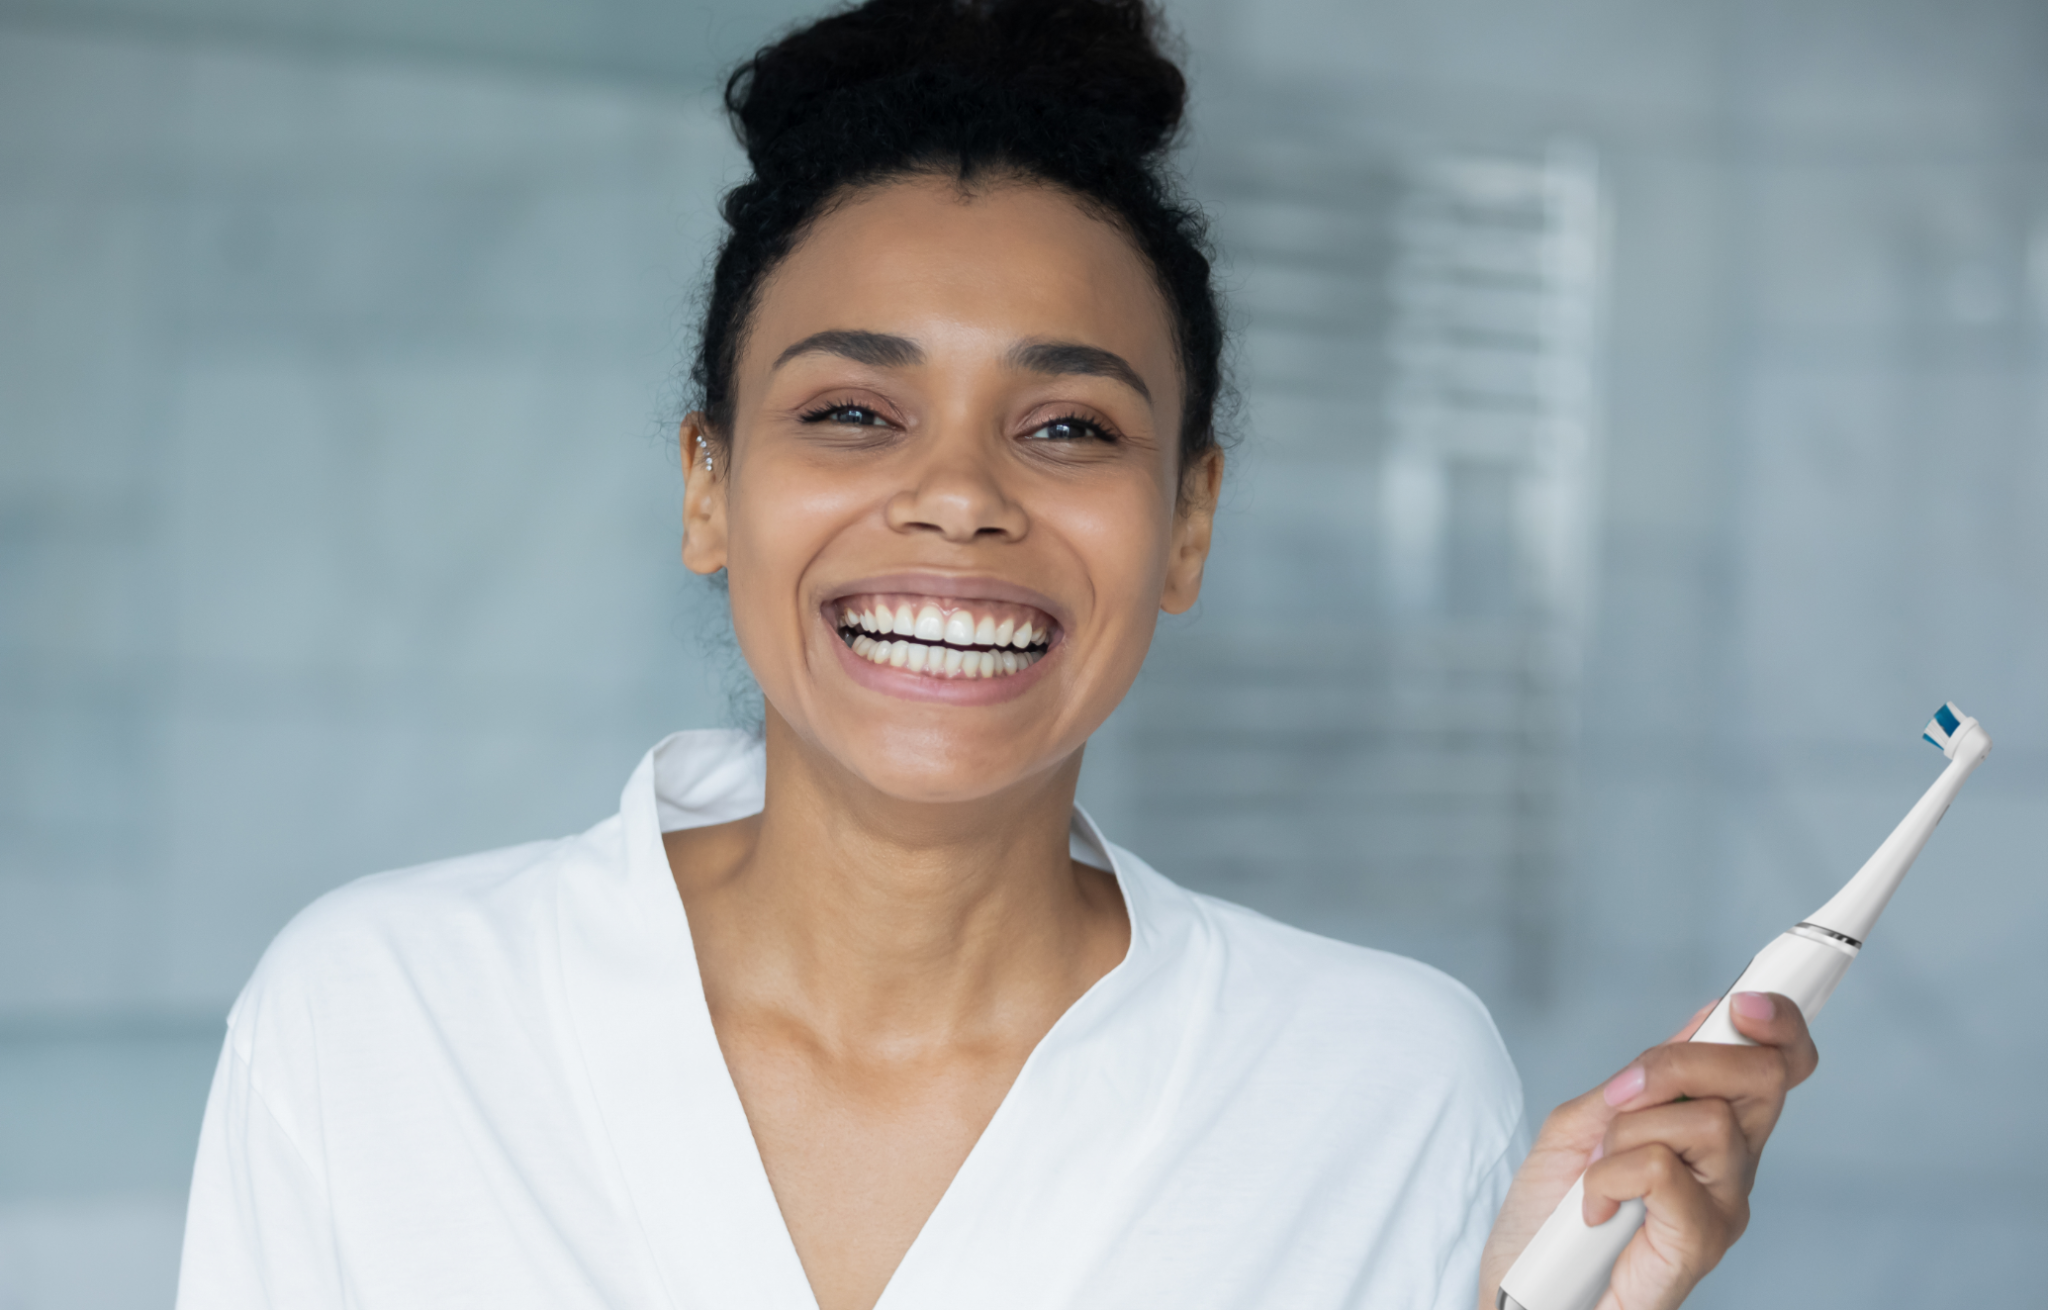 Oral Hygiene Tips To Unleash Your Best Smile